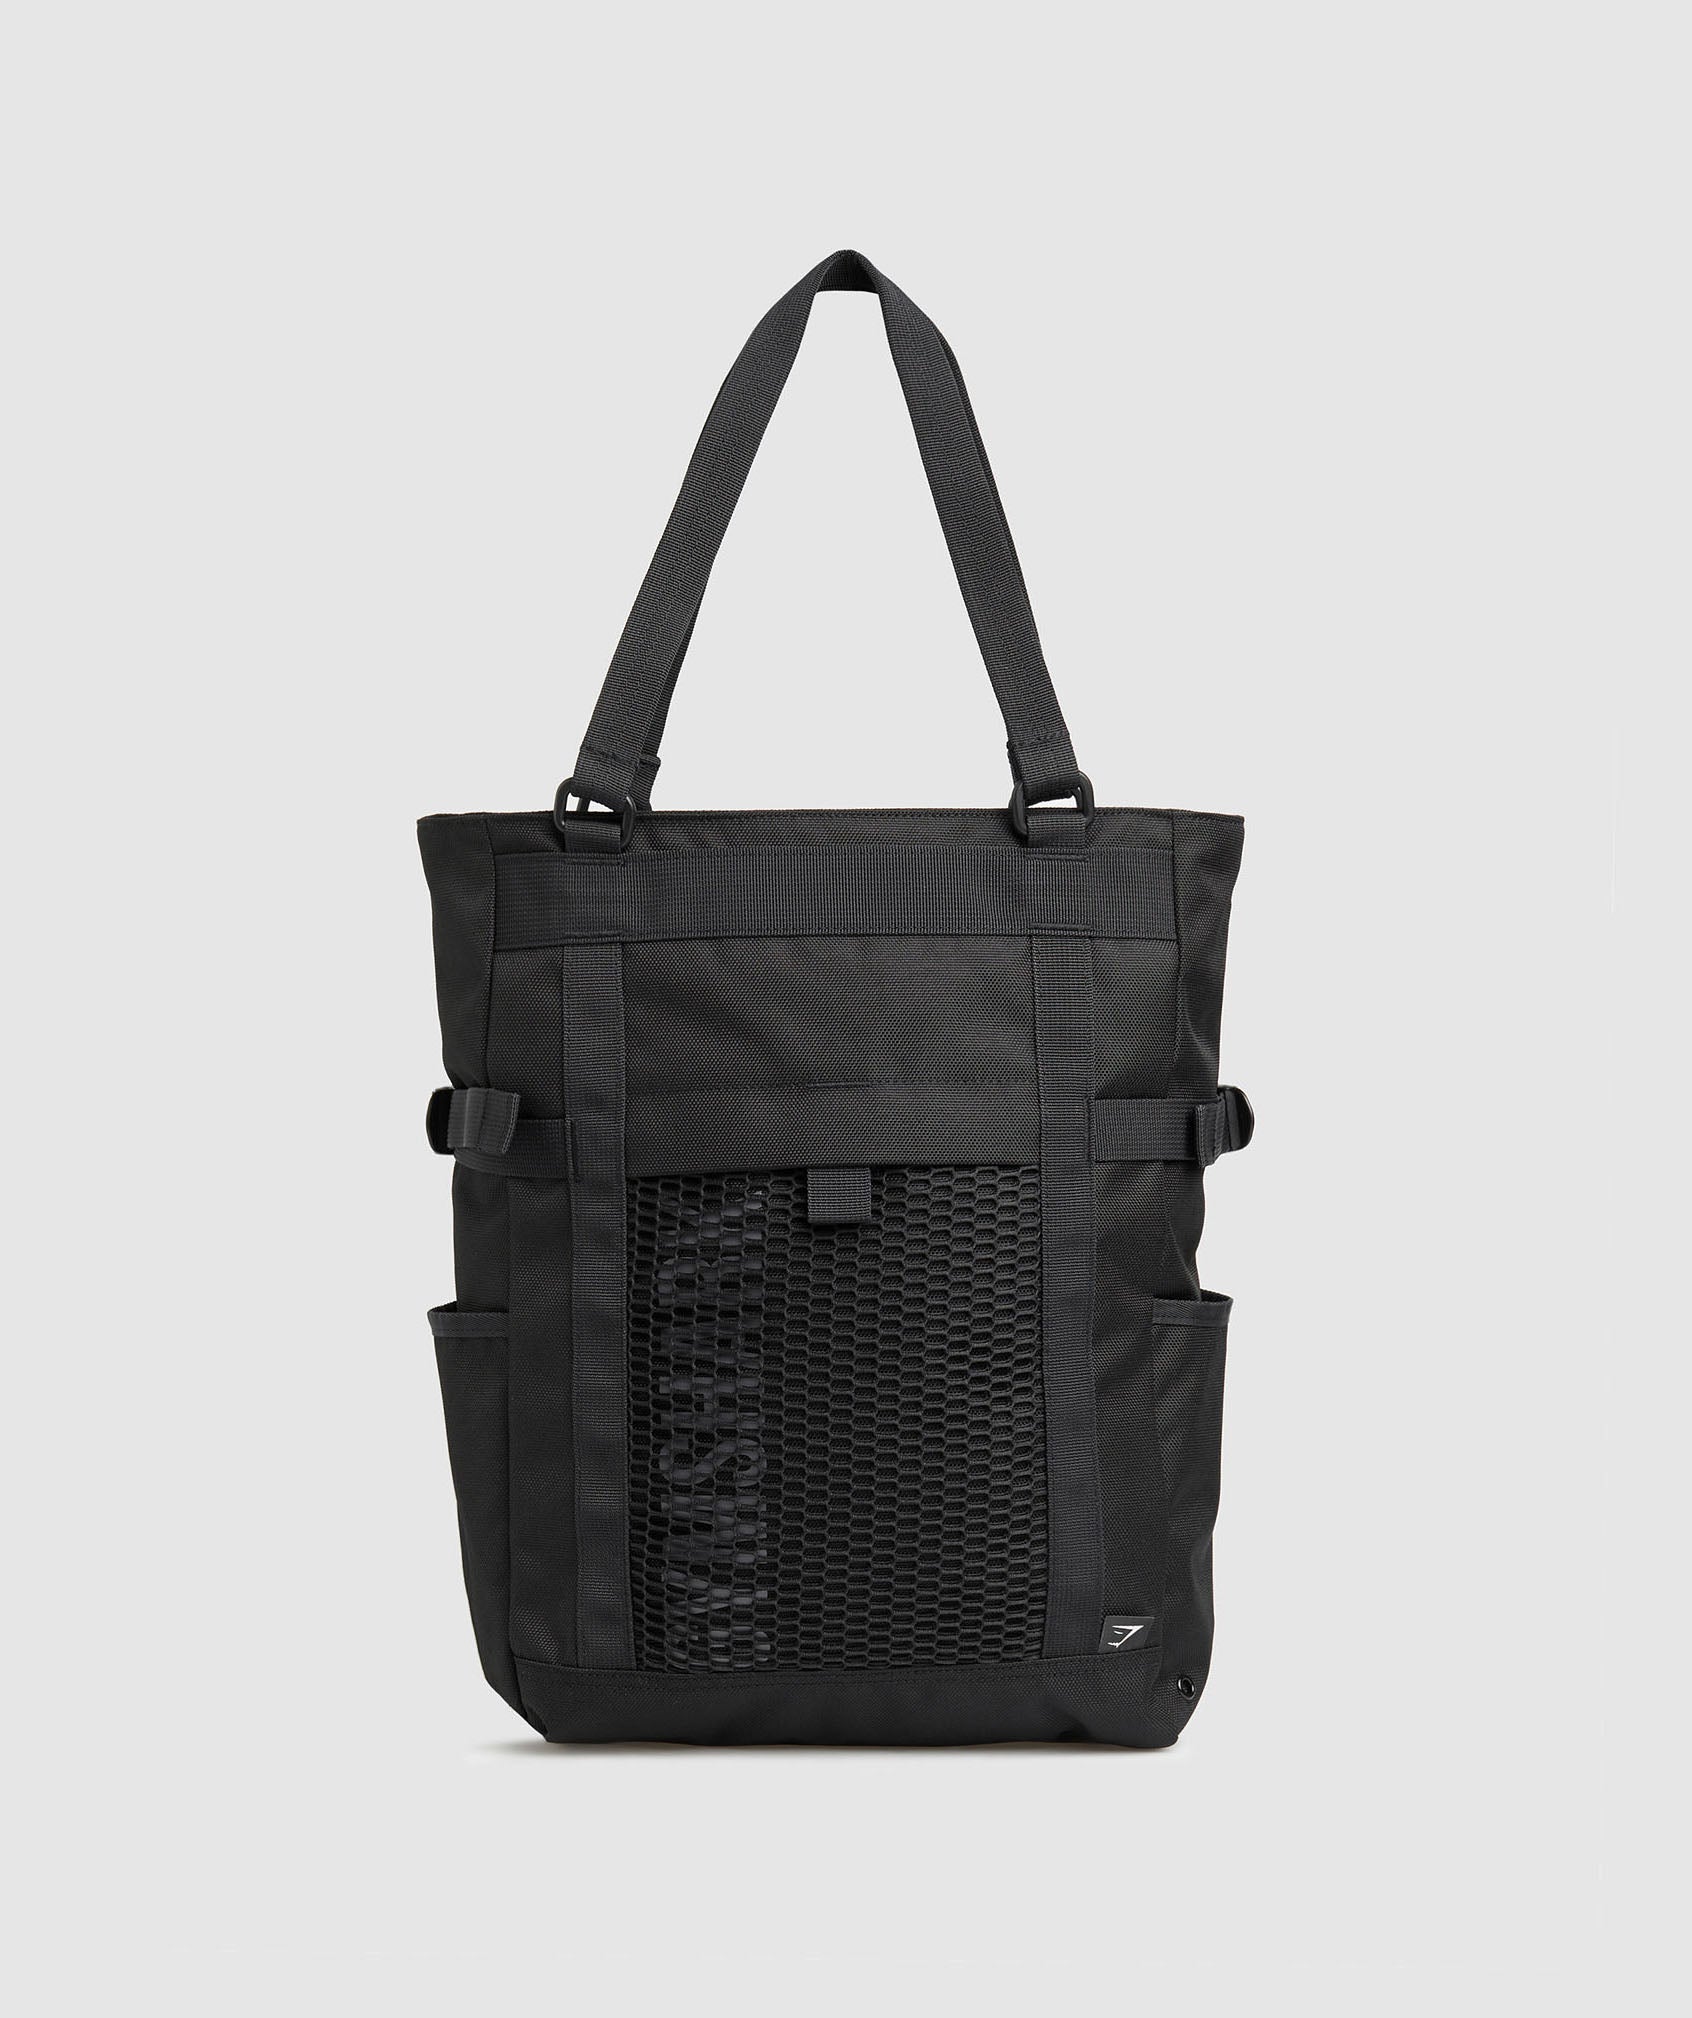 Pursuit Tote in Black - view 1